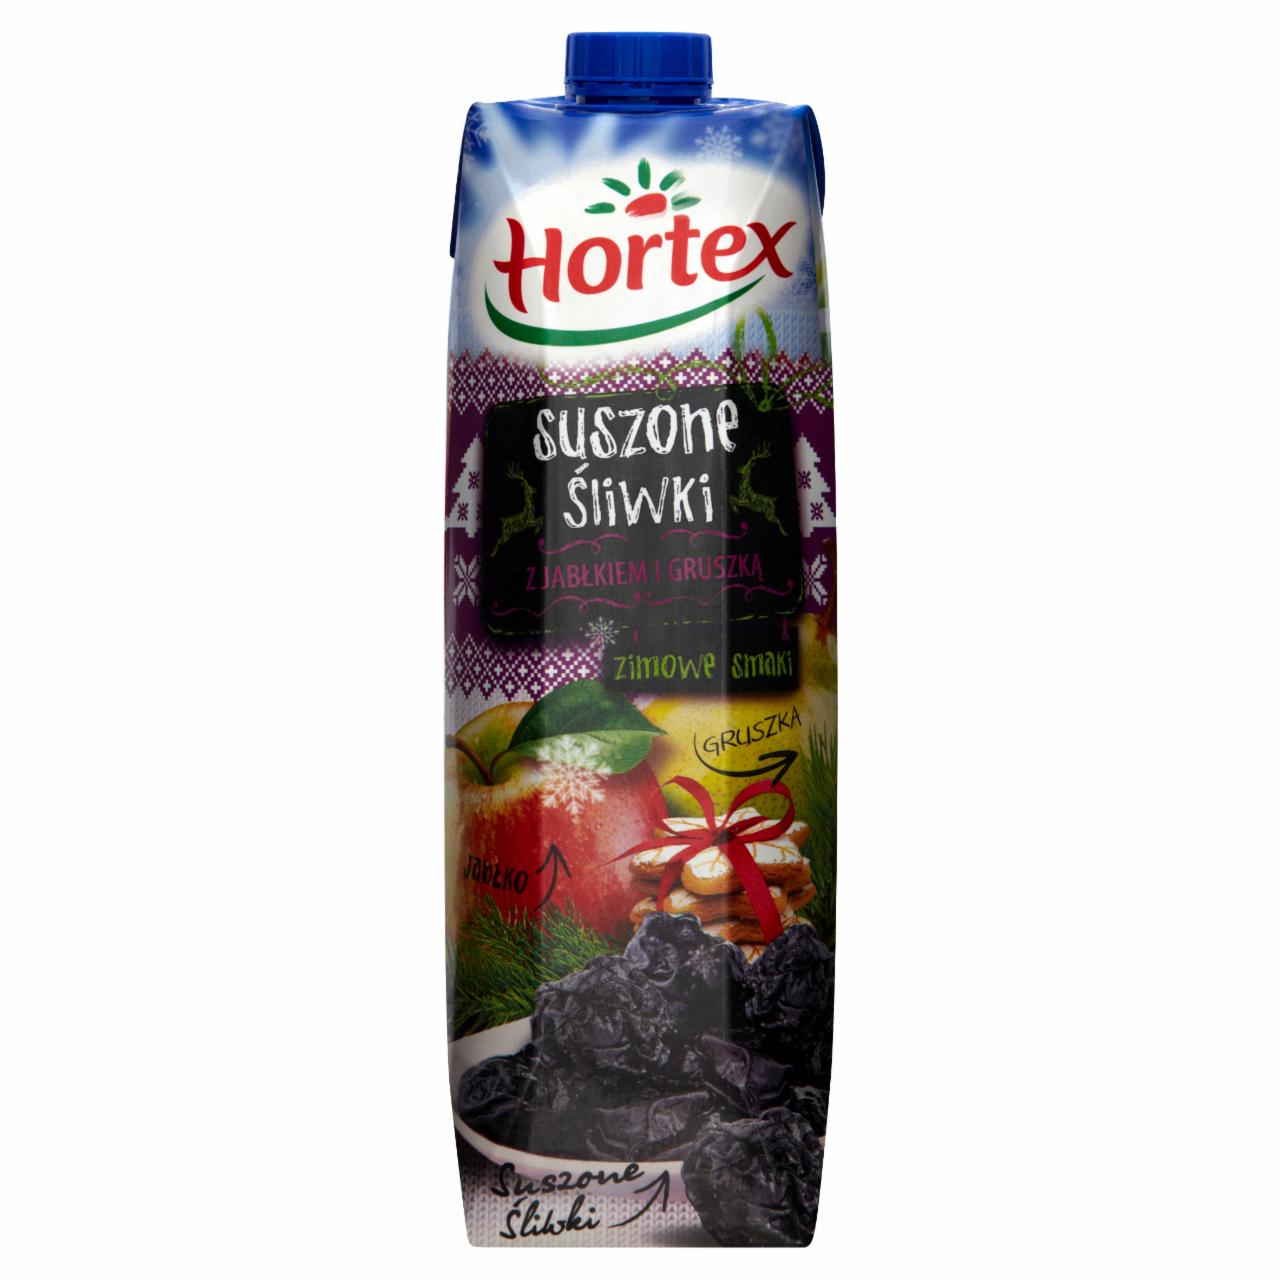 Photo - Hortex Zimowe smaki Dried Plums with Apple and Pear Drink 1 L